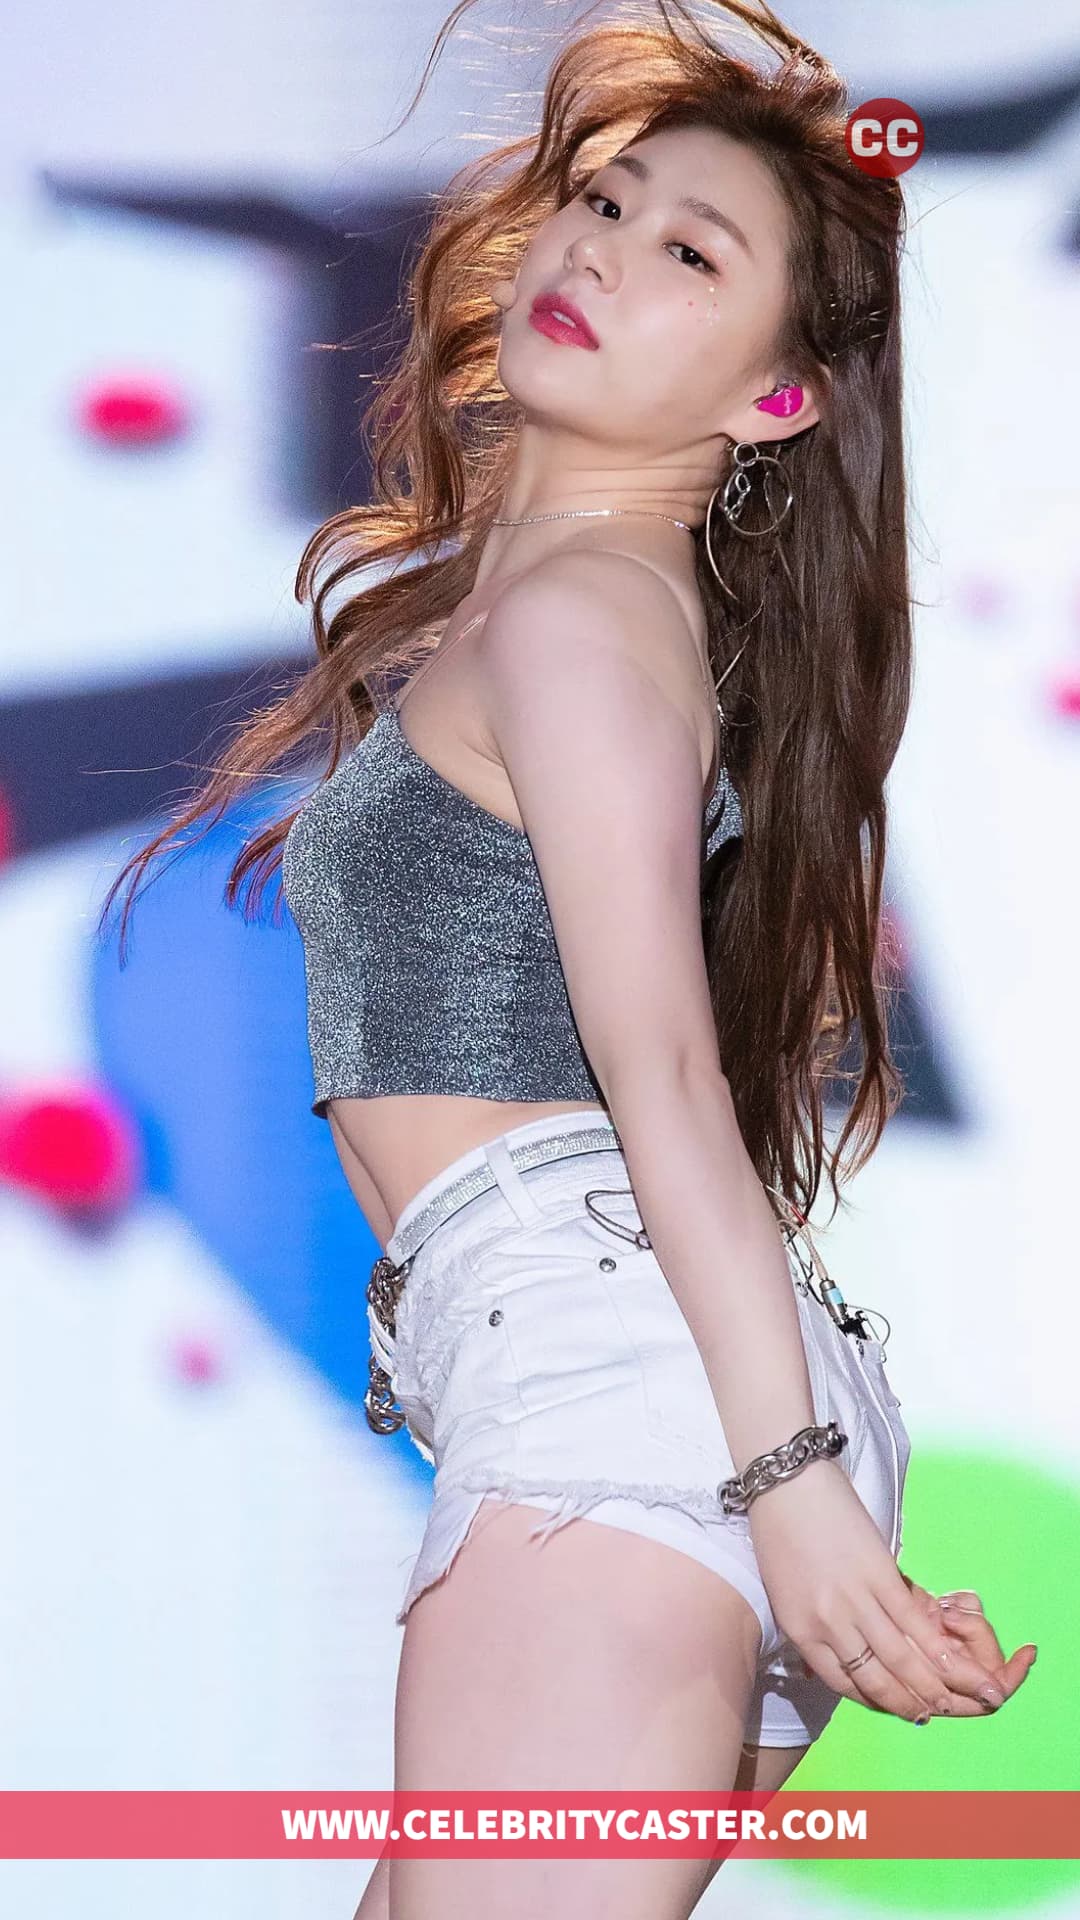 Beautiful South Korean Singer, Chaeryeong age, Chaeryeong Body Statistics, Chaeryeong ITZY height, Chaeryeong ITZY Measurements, Chaeryeong weight, Female Singers, Female South Korean Singers, ITZY, ITZY Members, Most Beautiful Girls from South Korea, South Korea, South Korean Celebrities, South Korean Dancers, South Korean Girl Group, South Korean Girls, South Korean Girls Band, South Korean Music Group, South Korean Rappers, South Korean Women, TV Personality, Vocalist